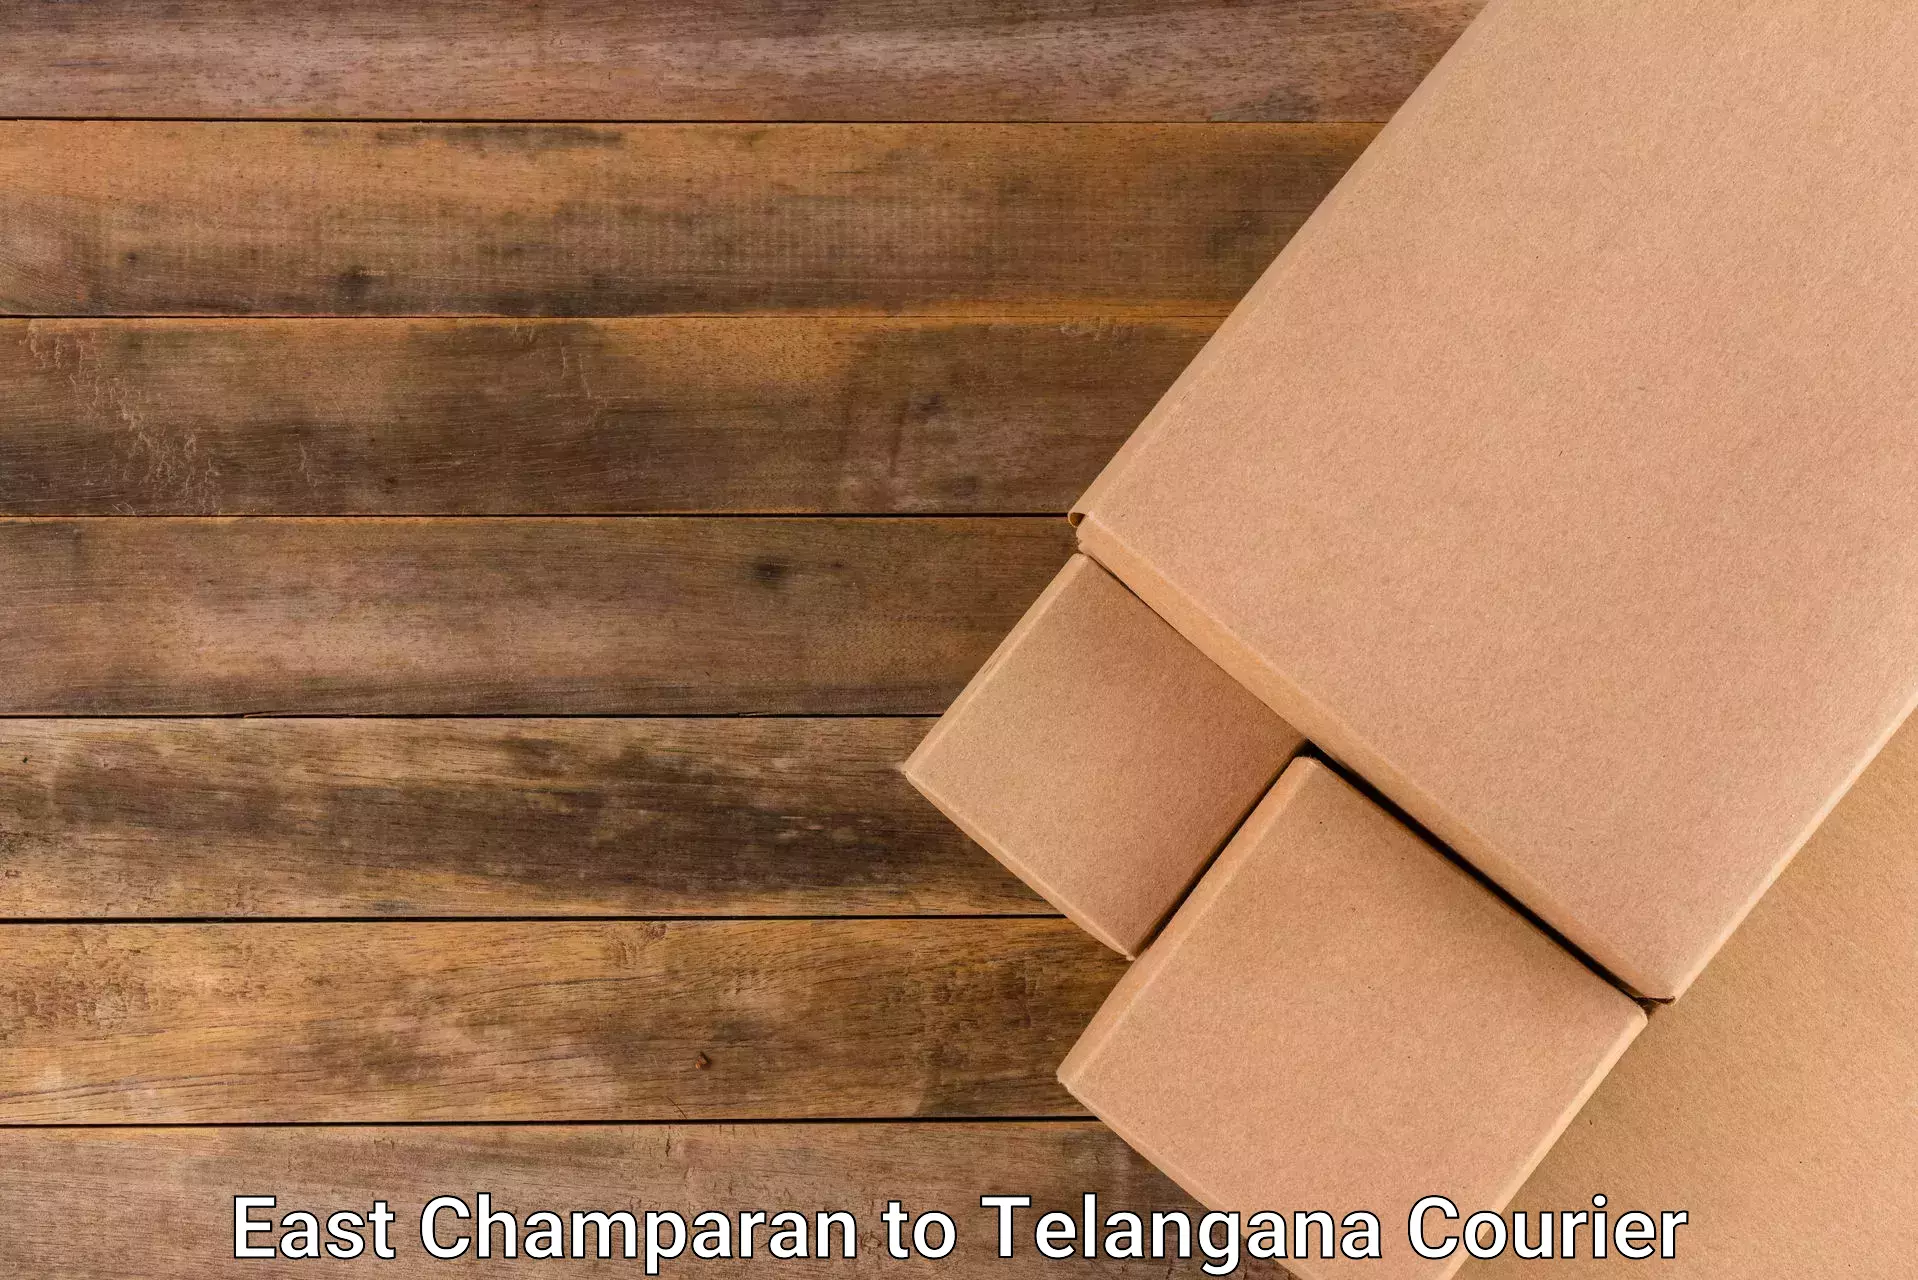 Expedited shipping solutions East Champaran to Secunderabad